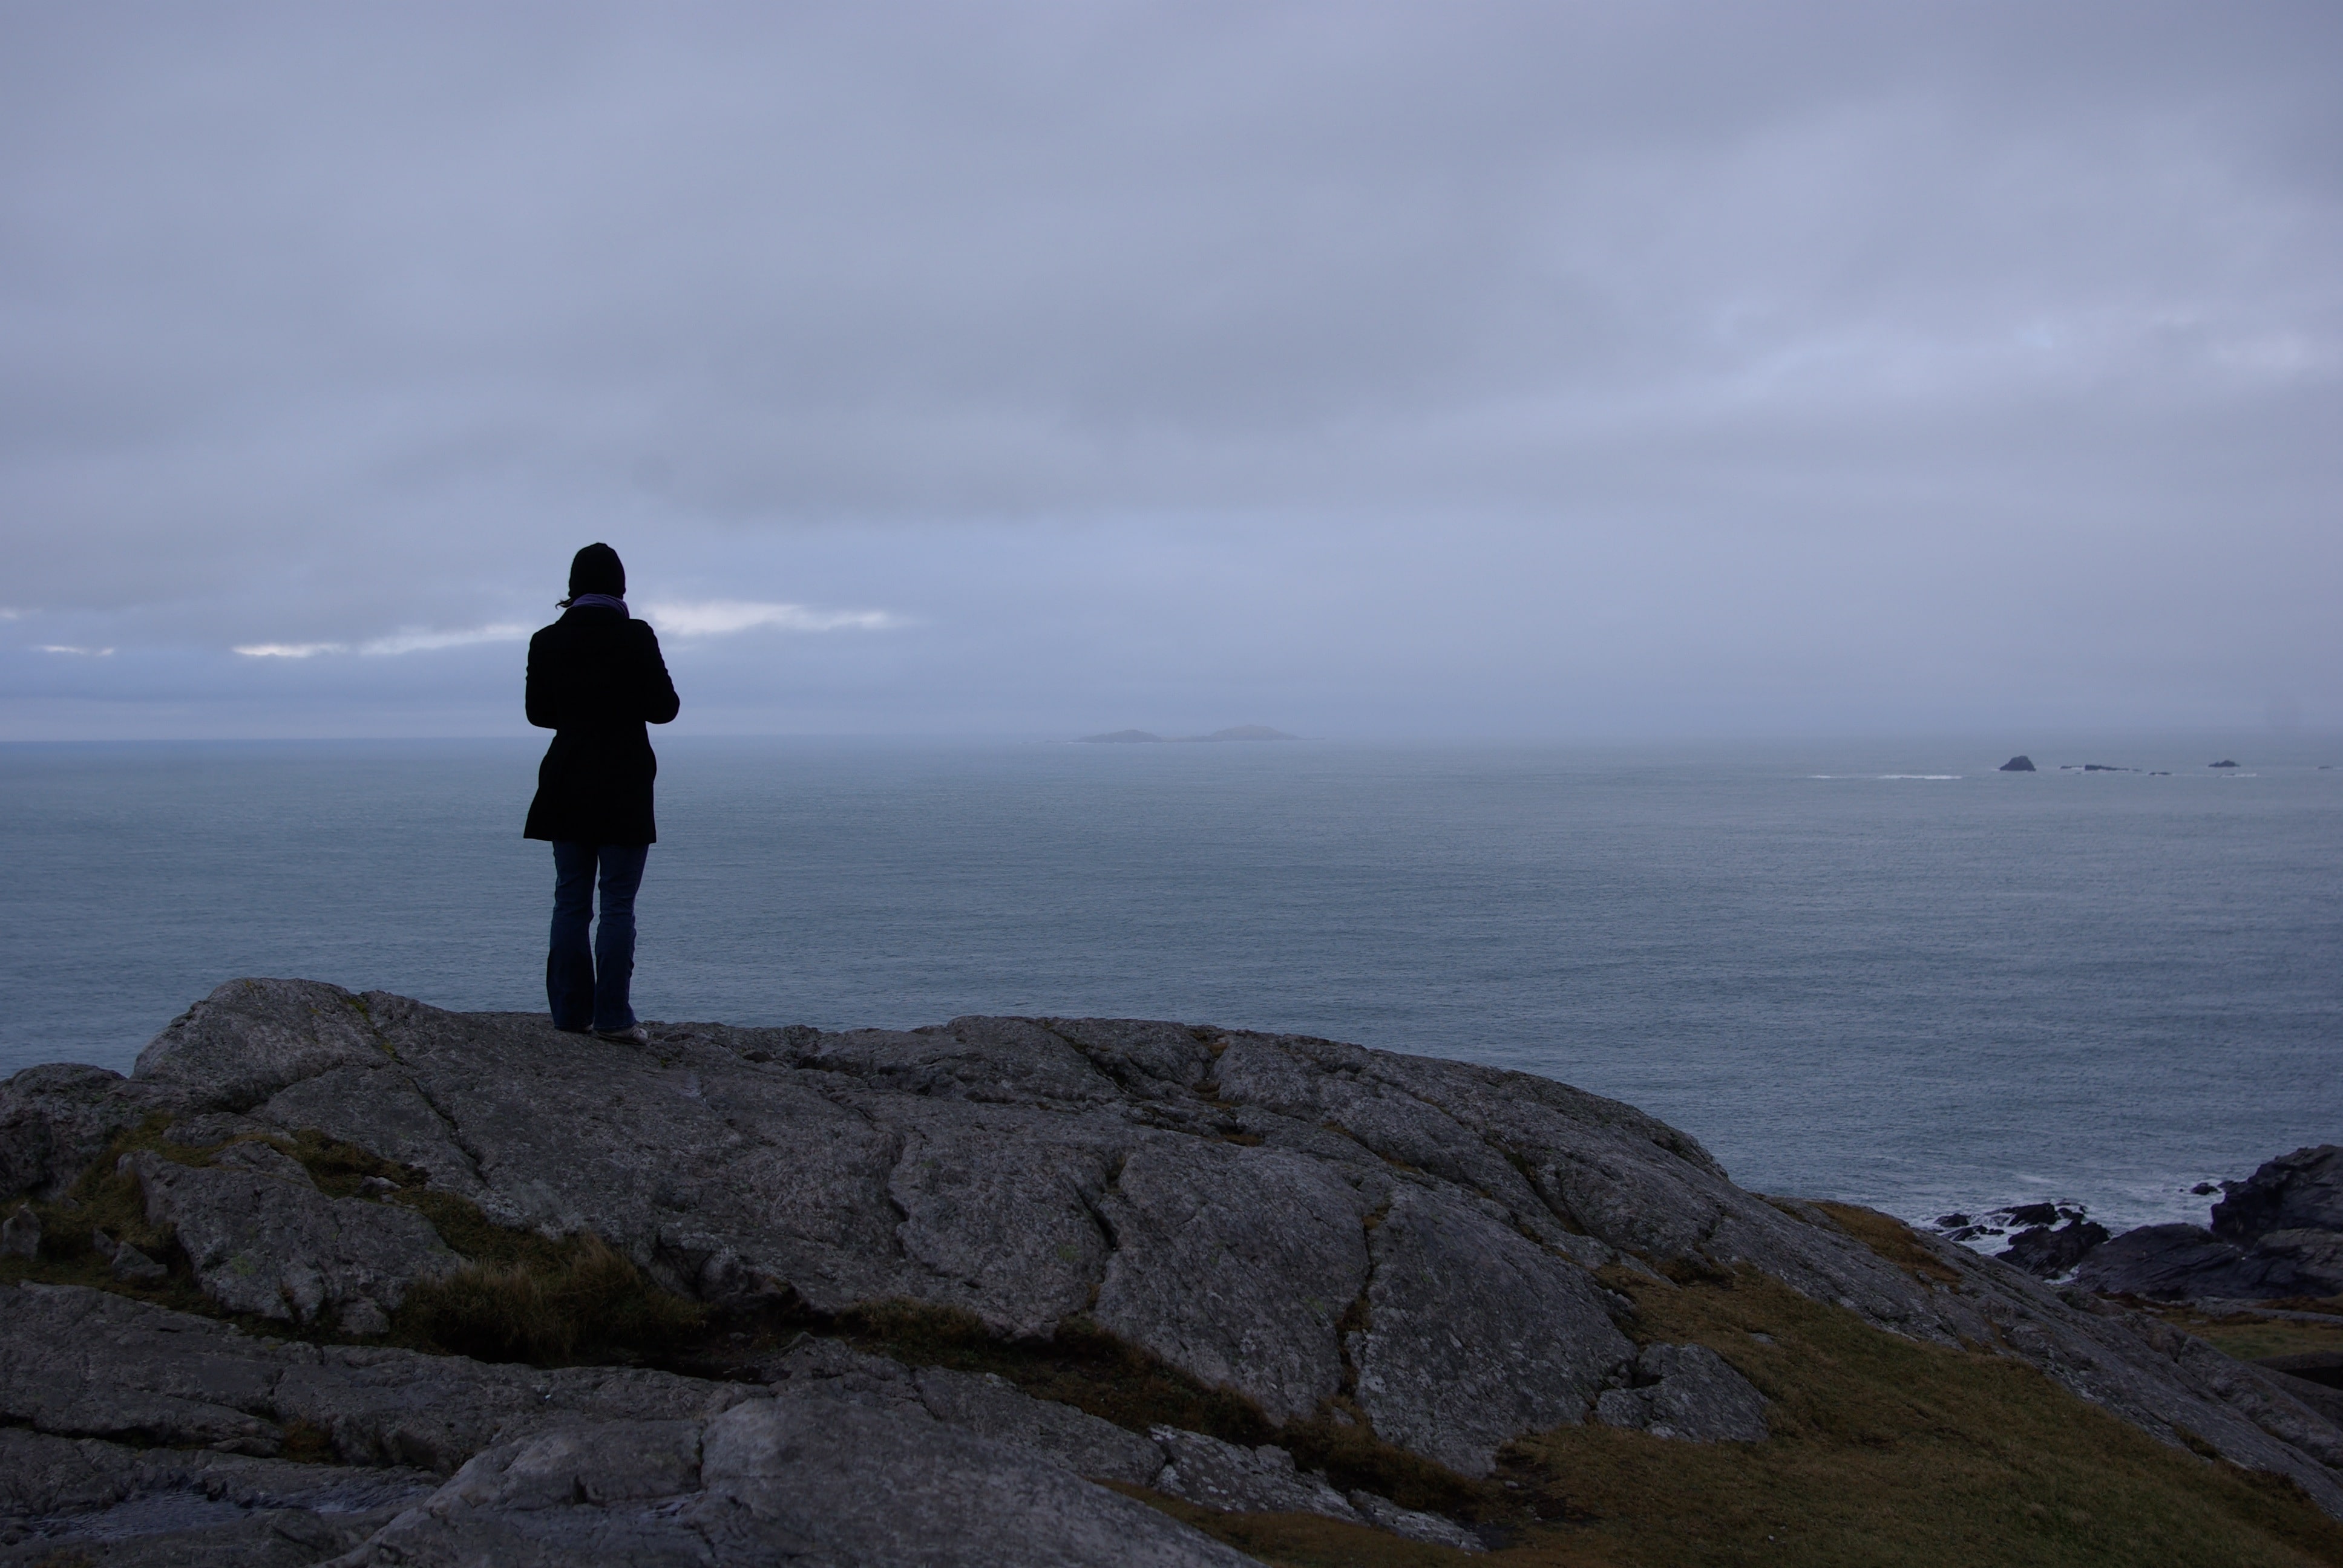 The northernmost point of the country, Malin Head, is an awesome place to visit in Ireland